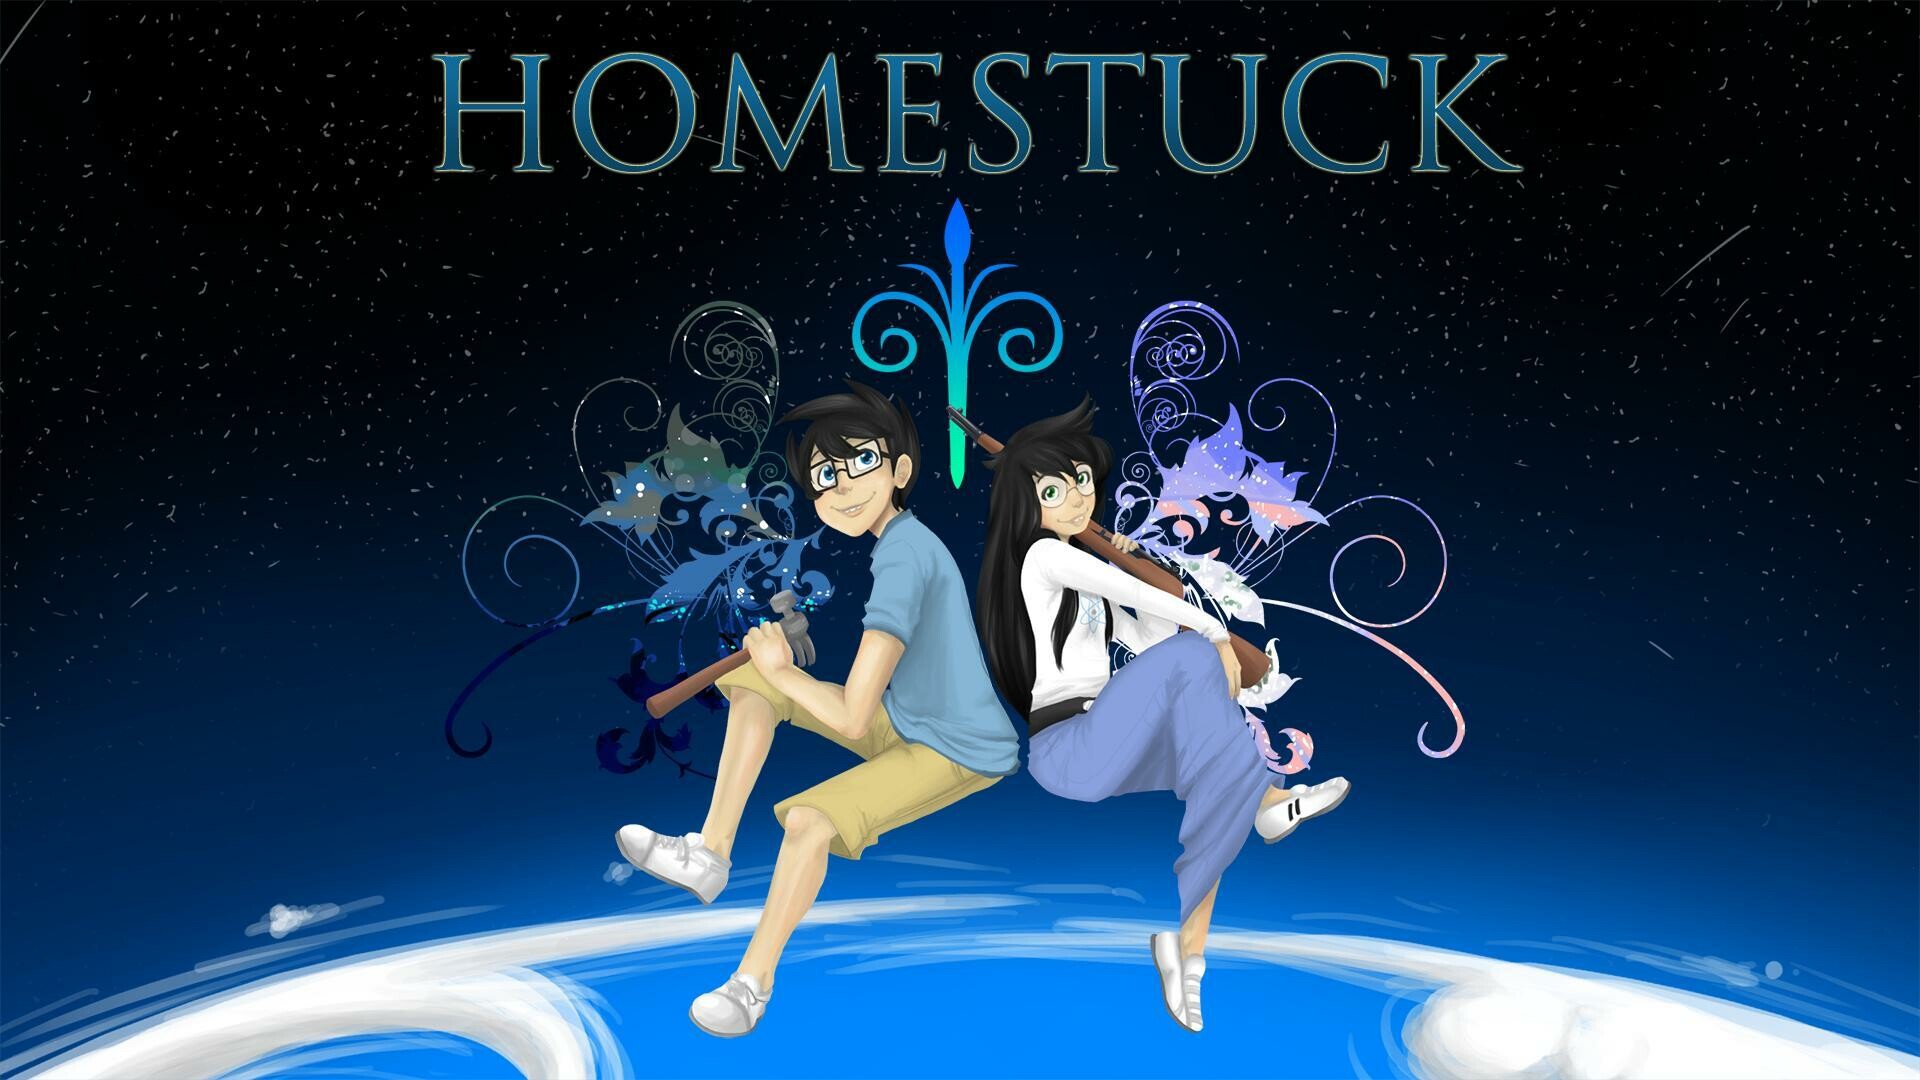 Homestuck: Inspired by games like The Sims, Spore, and EarthBound. 1920x1080 Full HD Background.